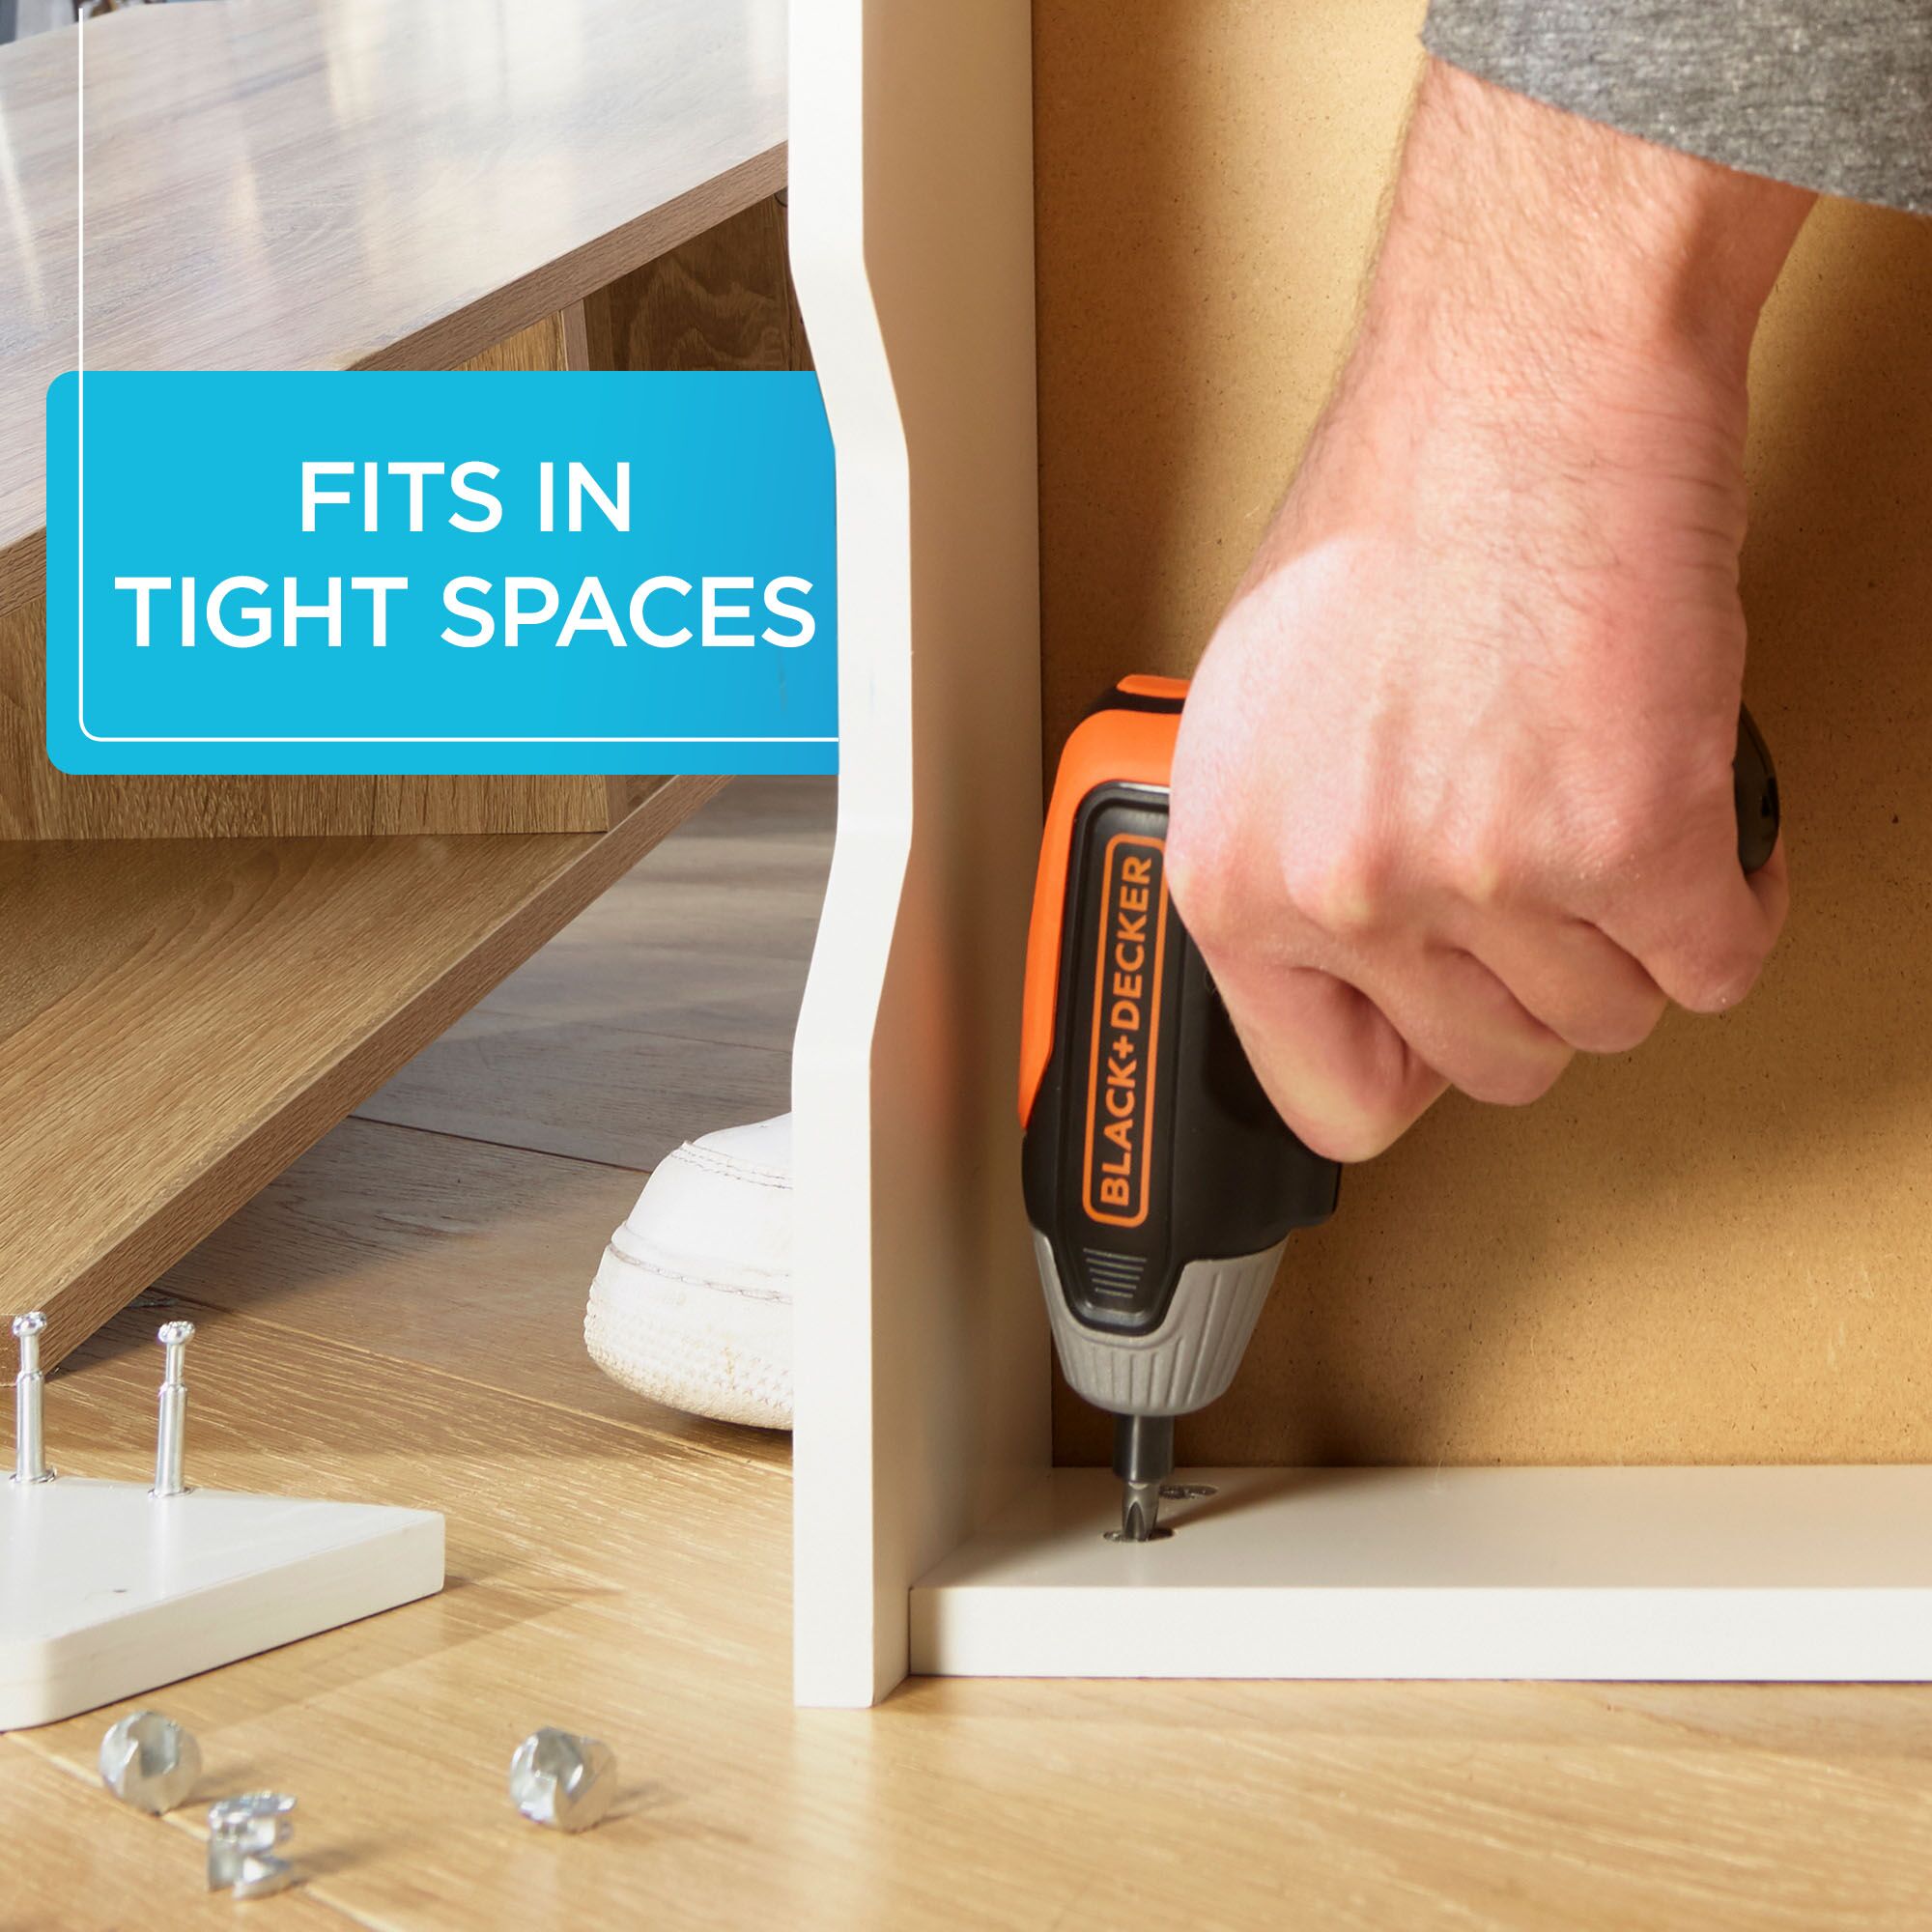 The BLACK+DECKER 4V Max Cordless Screwdriver fits in tight spaces